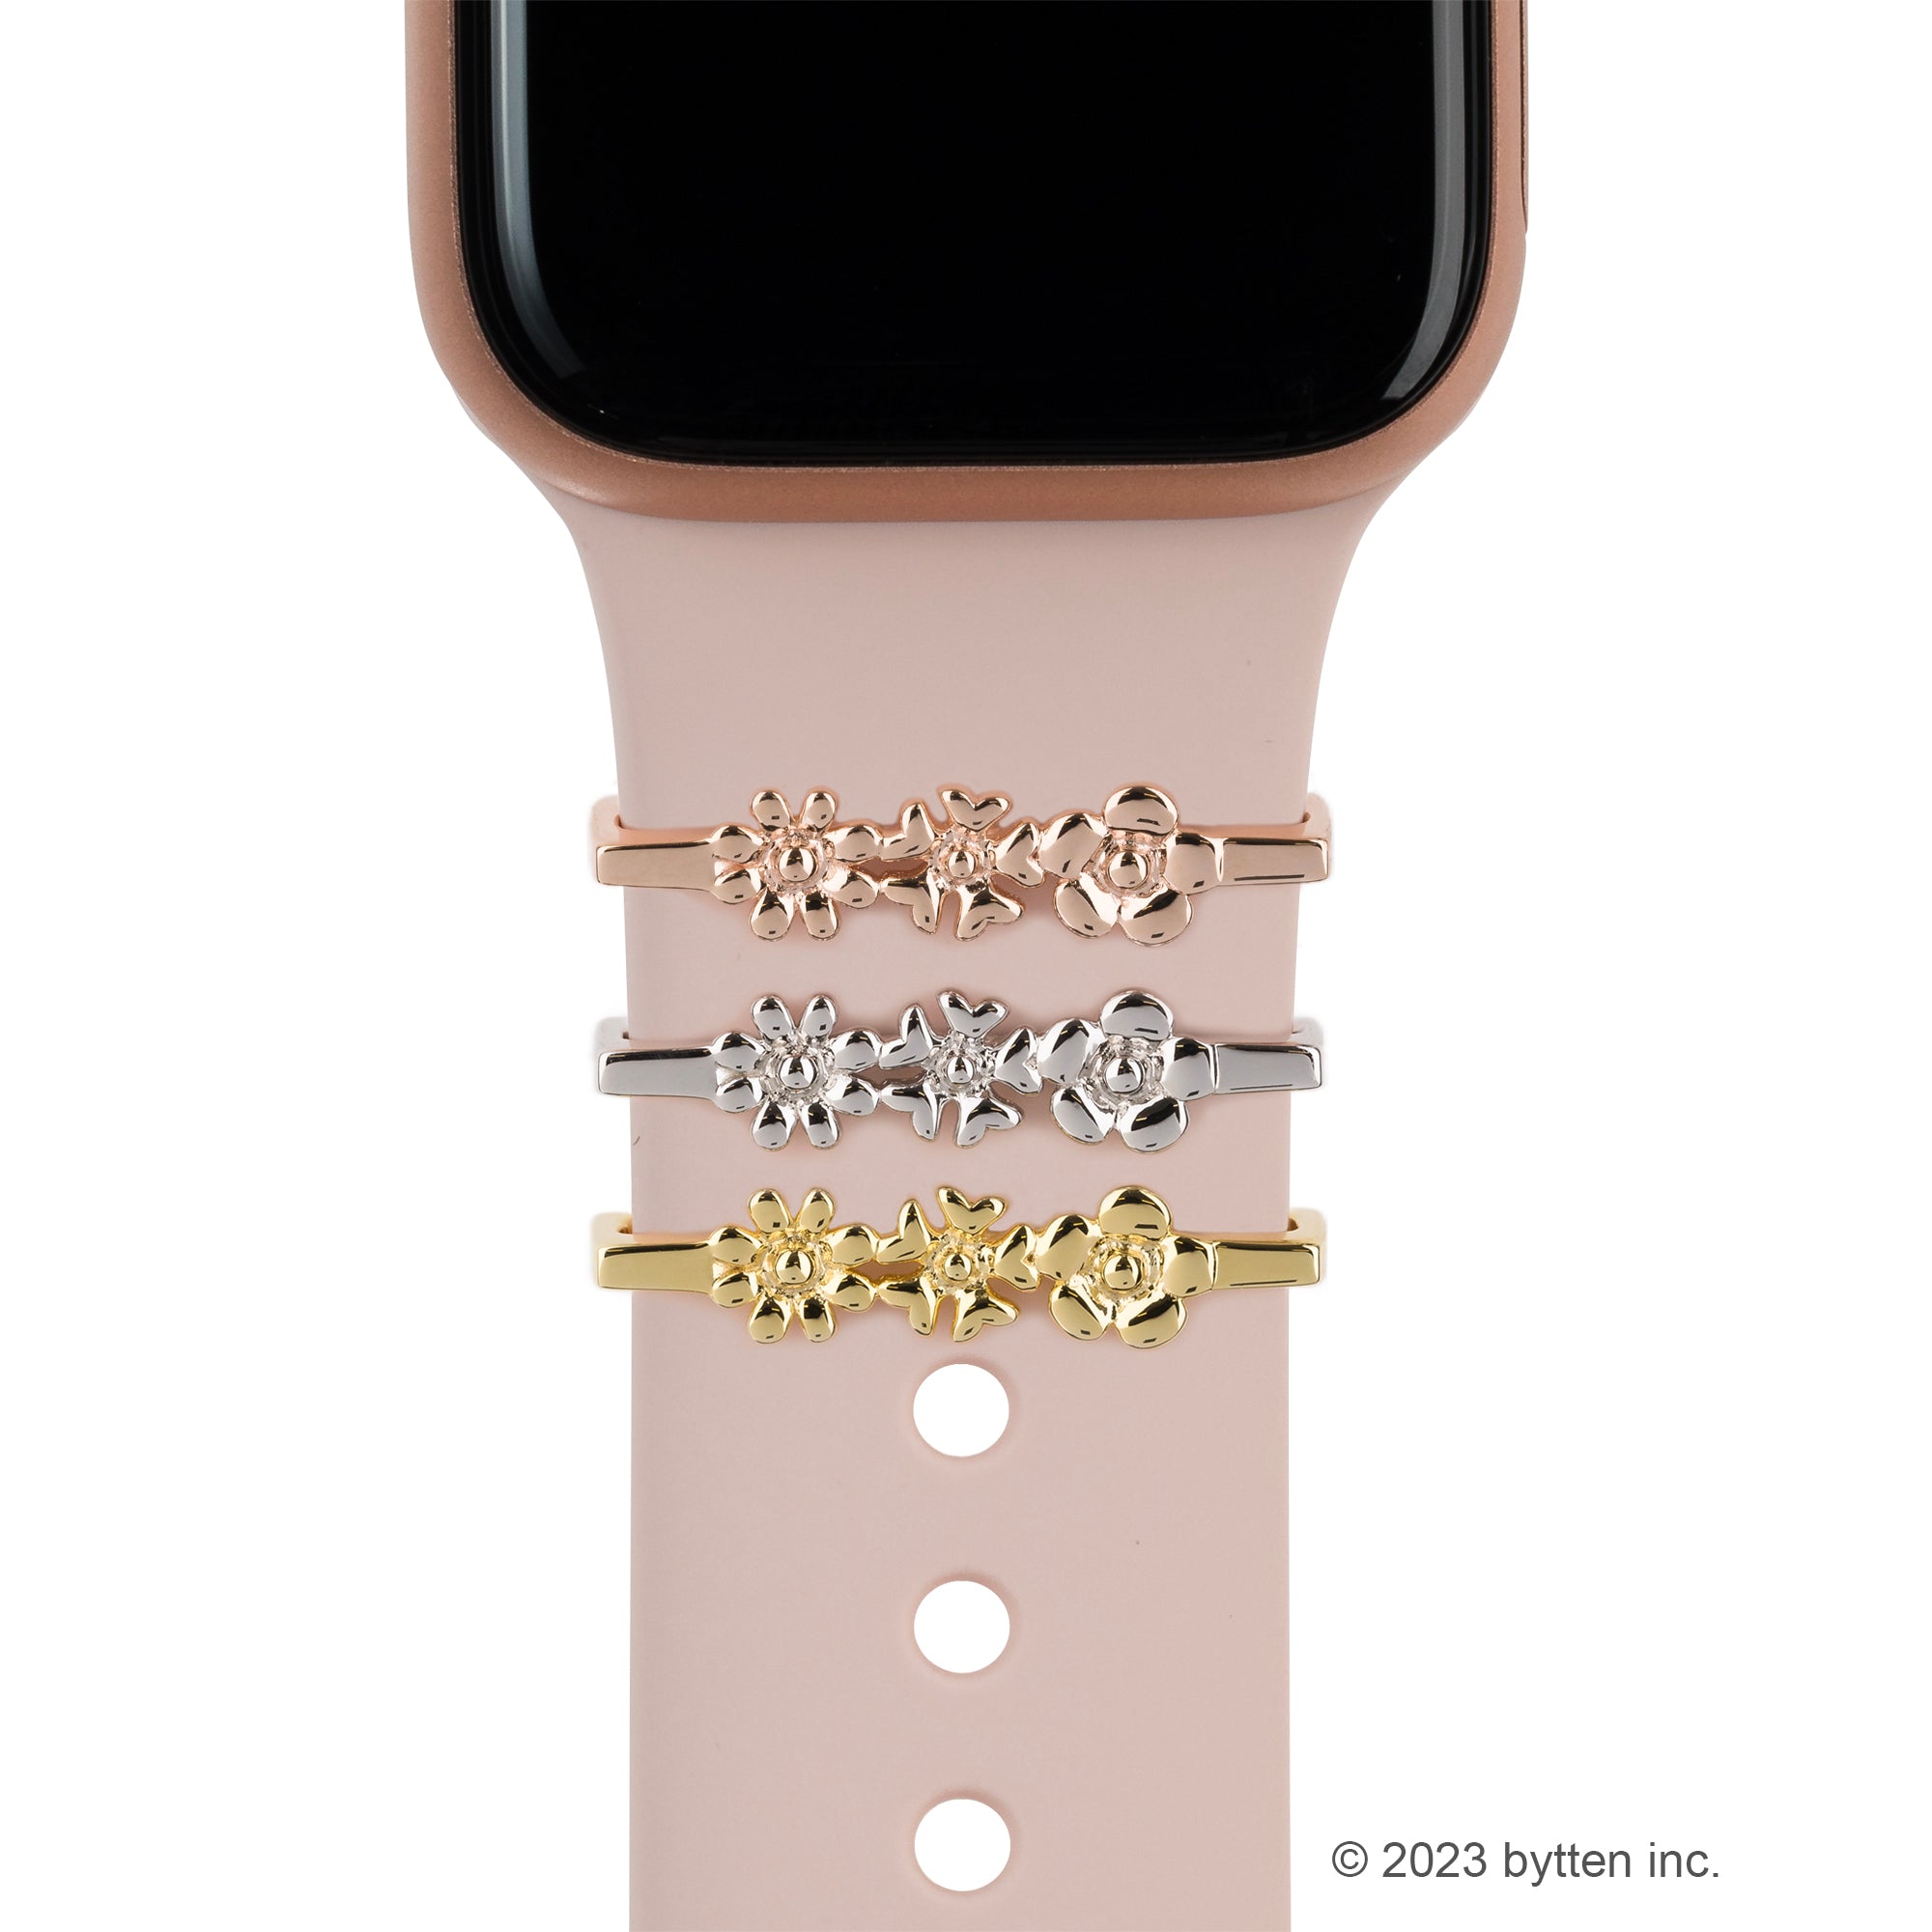 bytten triple flower ring accessory for Apple Watch and Fitbit bands in rose gold, silver and gold